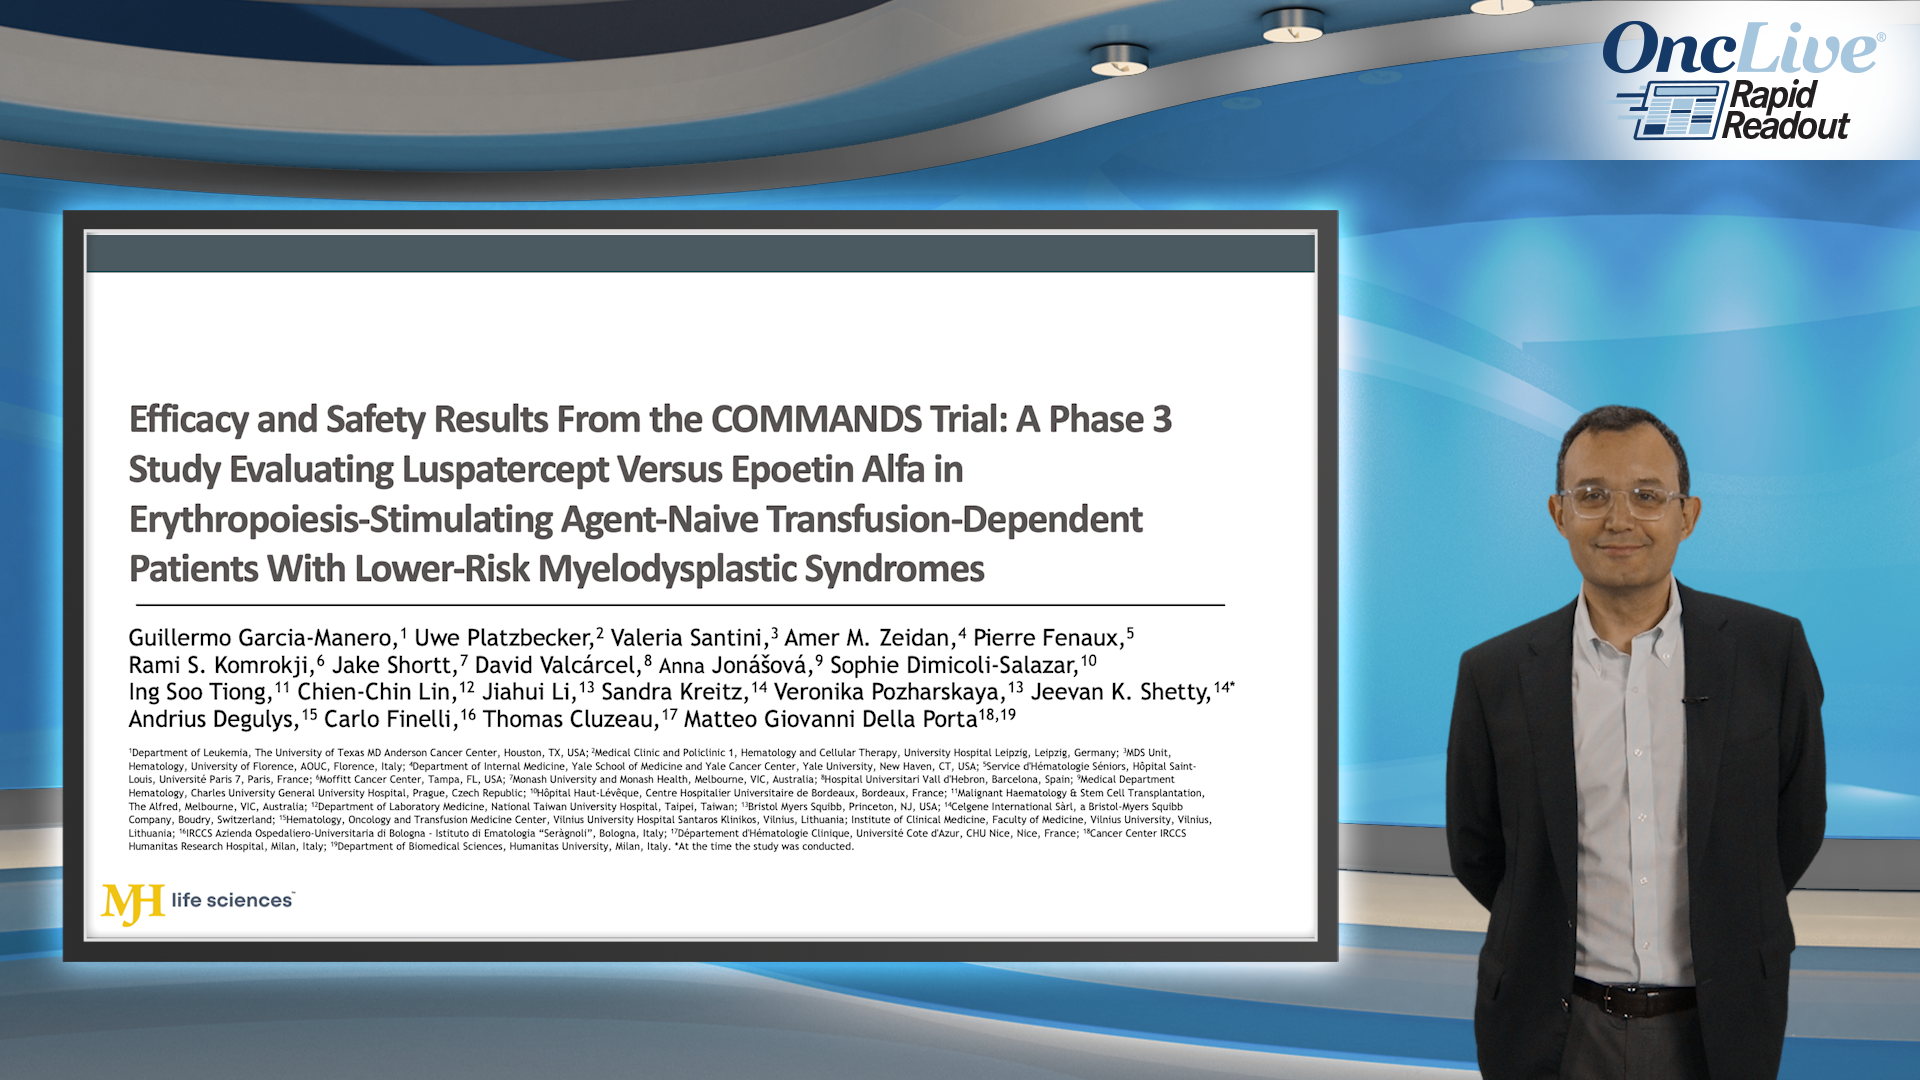 Efficacy and Safety Results From the COMMANDS Trial: A Phase 3 Study Evaluating Luspatercept Versus Epoetin Alfa in Erythropoiesis-Stimulating Agent-Naive Transfusion-Dependent Patients With Lower-Risk Myelodysplastic Syndromes